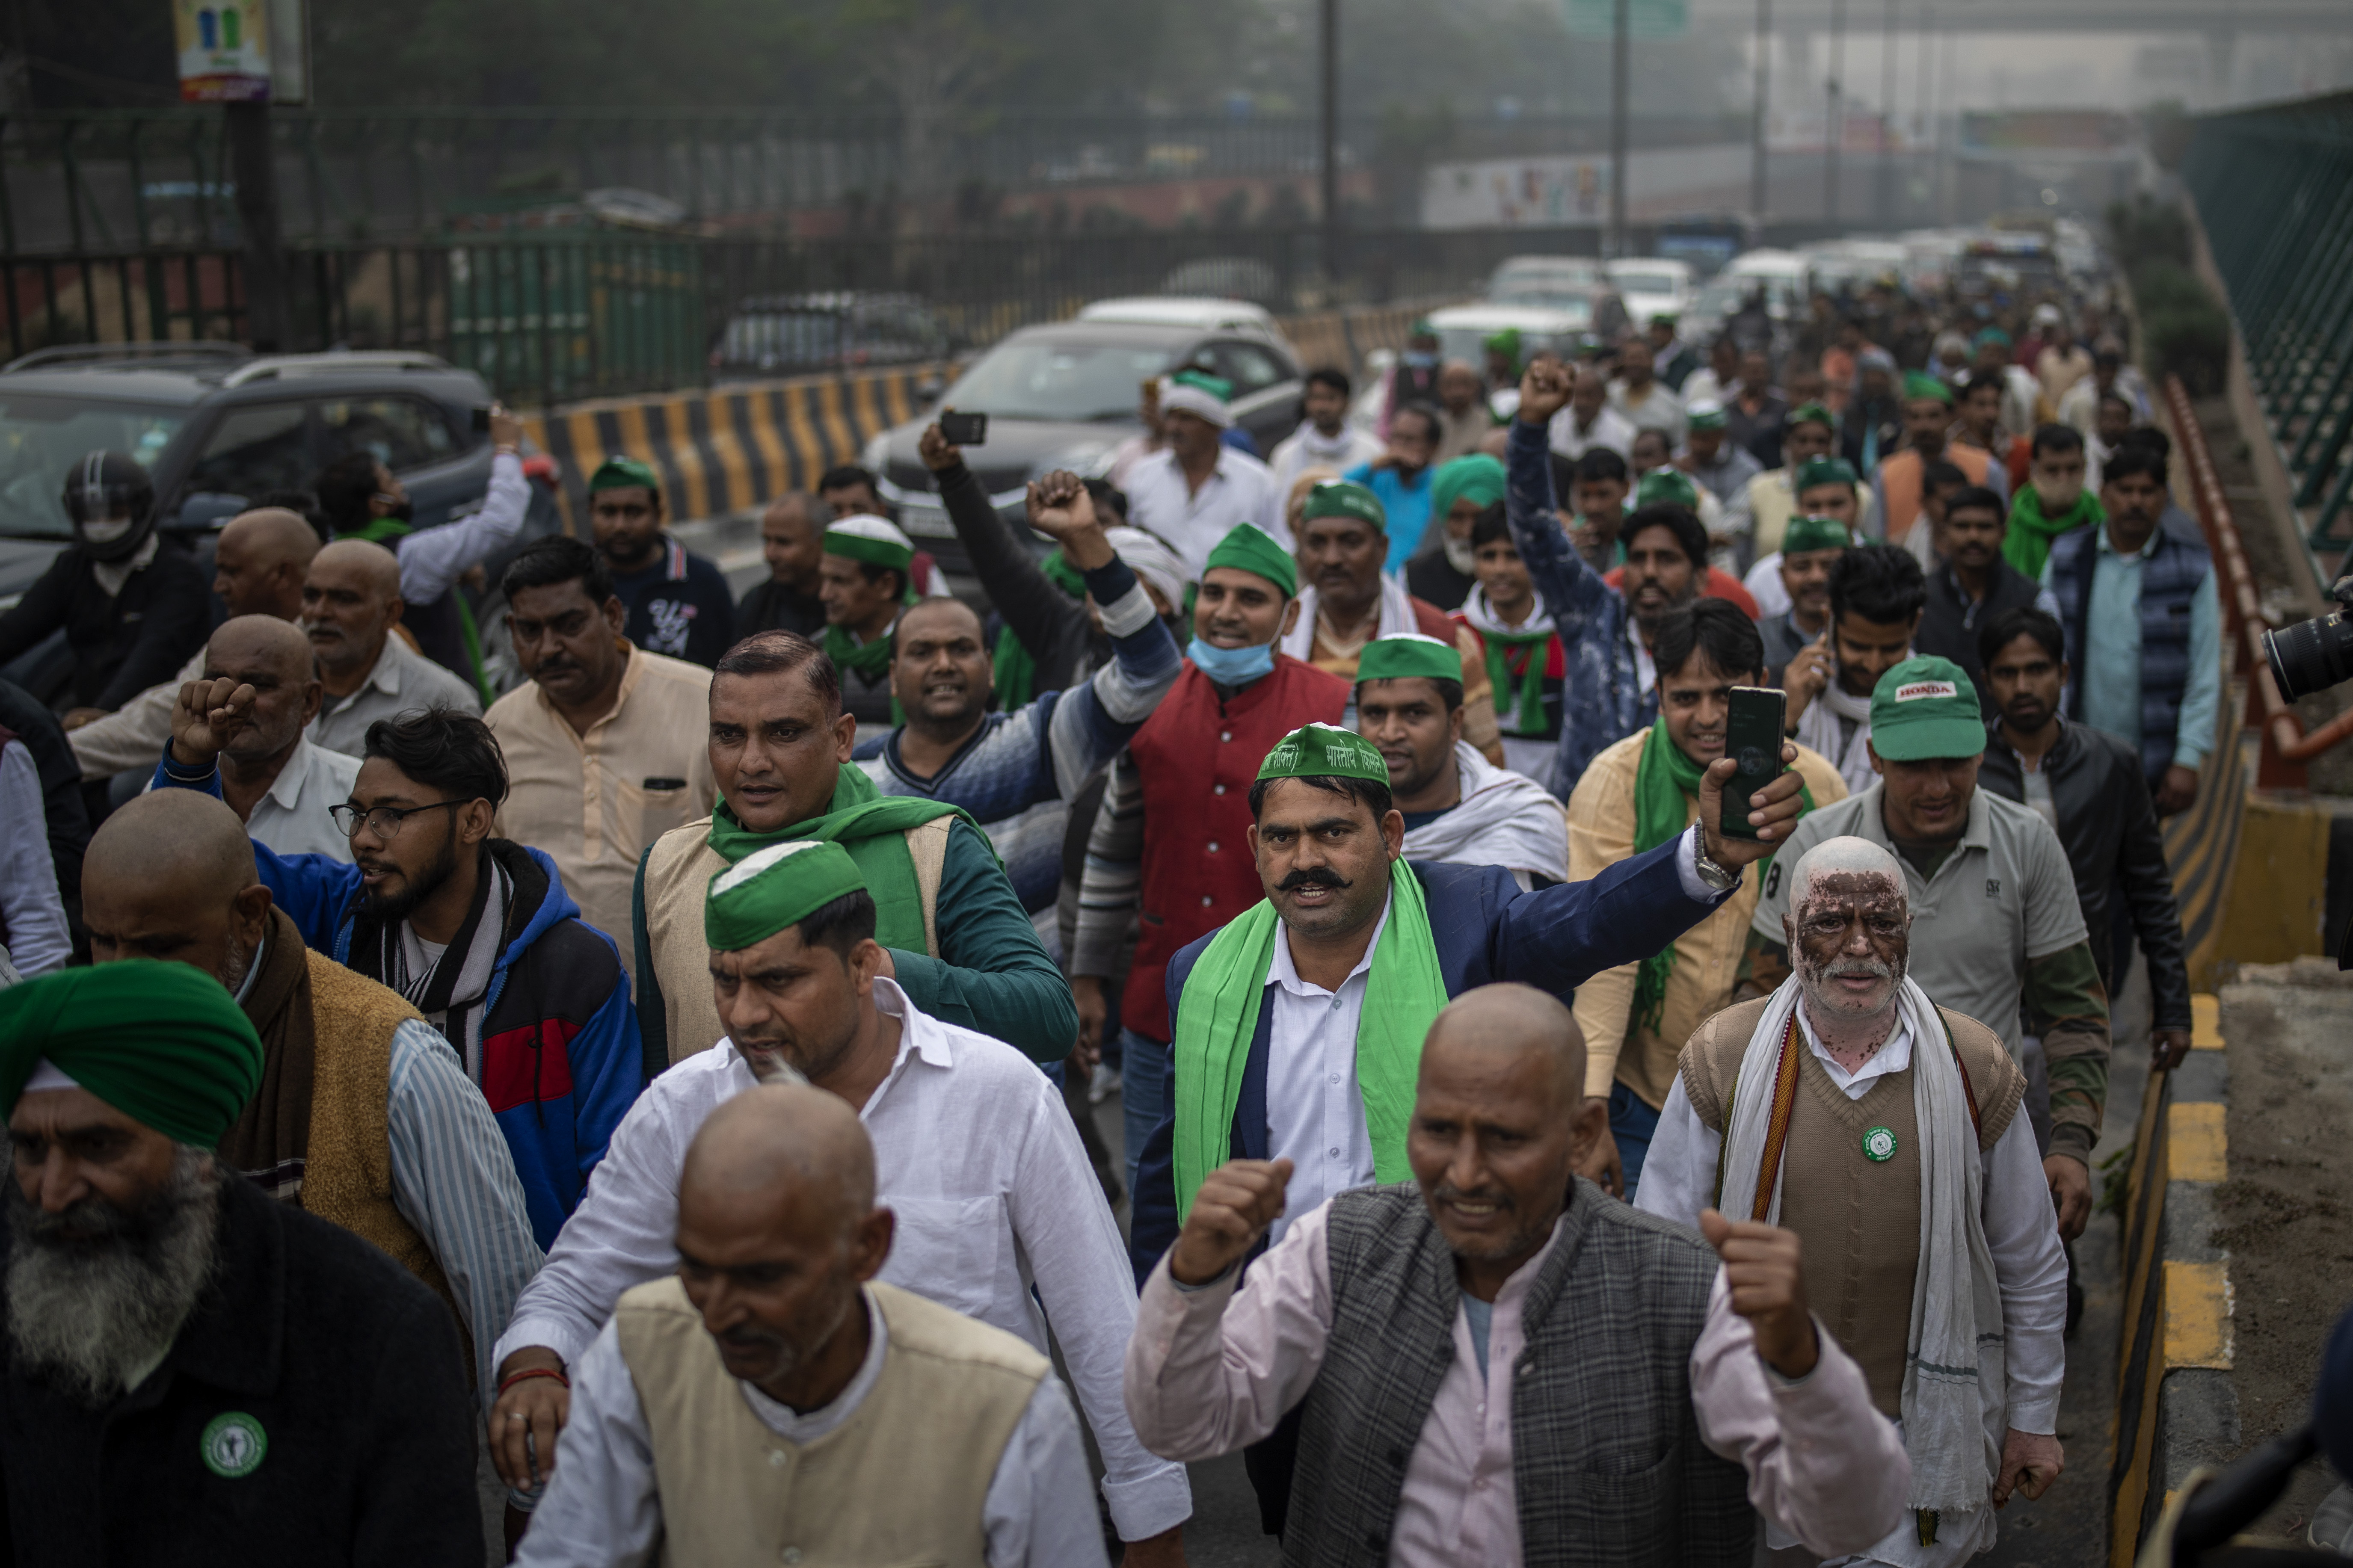 A group of protesting farmers march towards the residence of ruling Bhartiya Janata Party leader Mahesh Sharma to hand over a list of their demands during a protest against new farm in Noida on the outskirts of New Delhi, India, Saturday, Dec. 12, 2020. Indian farmers filed a petition with the Supreme Court on Friday seeking the quashing of three new laws on agricultural reform which they say will drive down crop prices, as they continued their two-week blockade of highways connecting to the Indian capital. Photo: AP